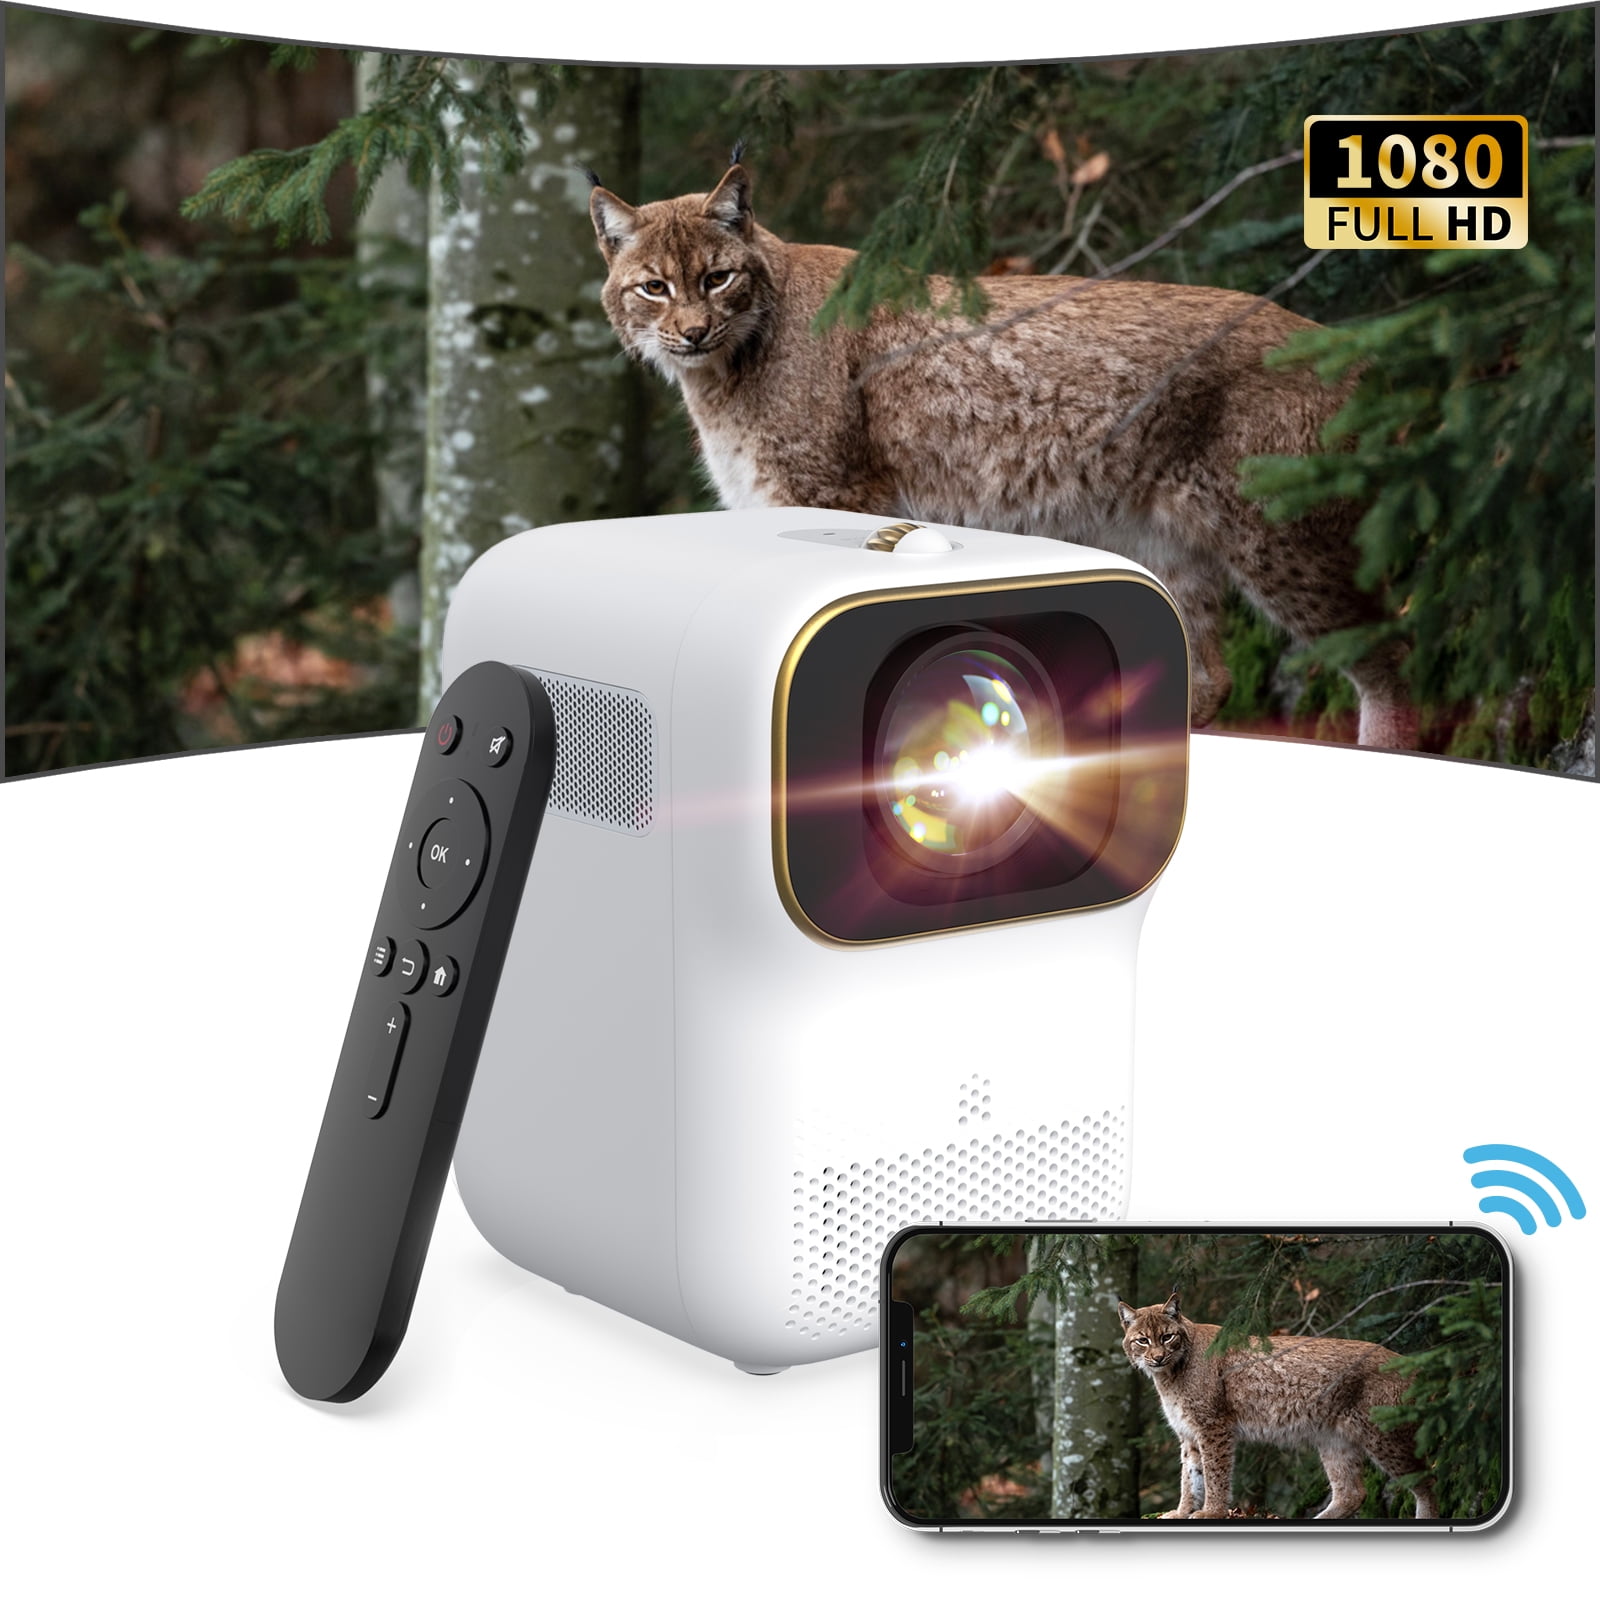 Mini Projector WiFi, WEWATCH Portable Native 1080P Video Projector 